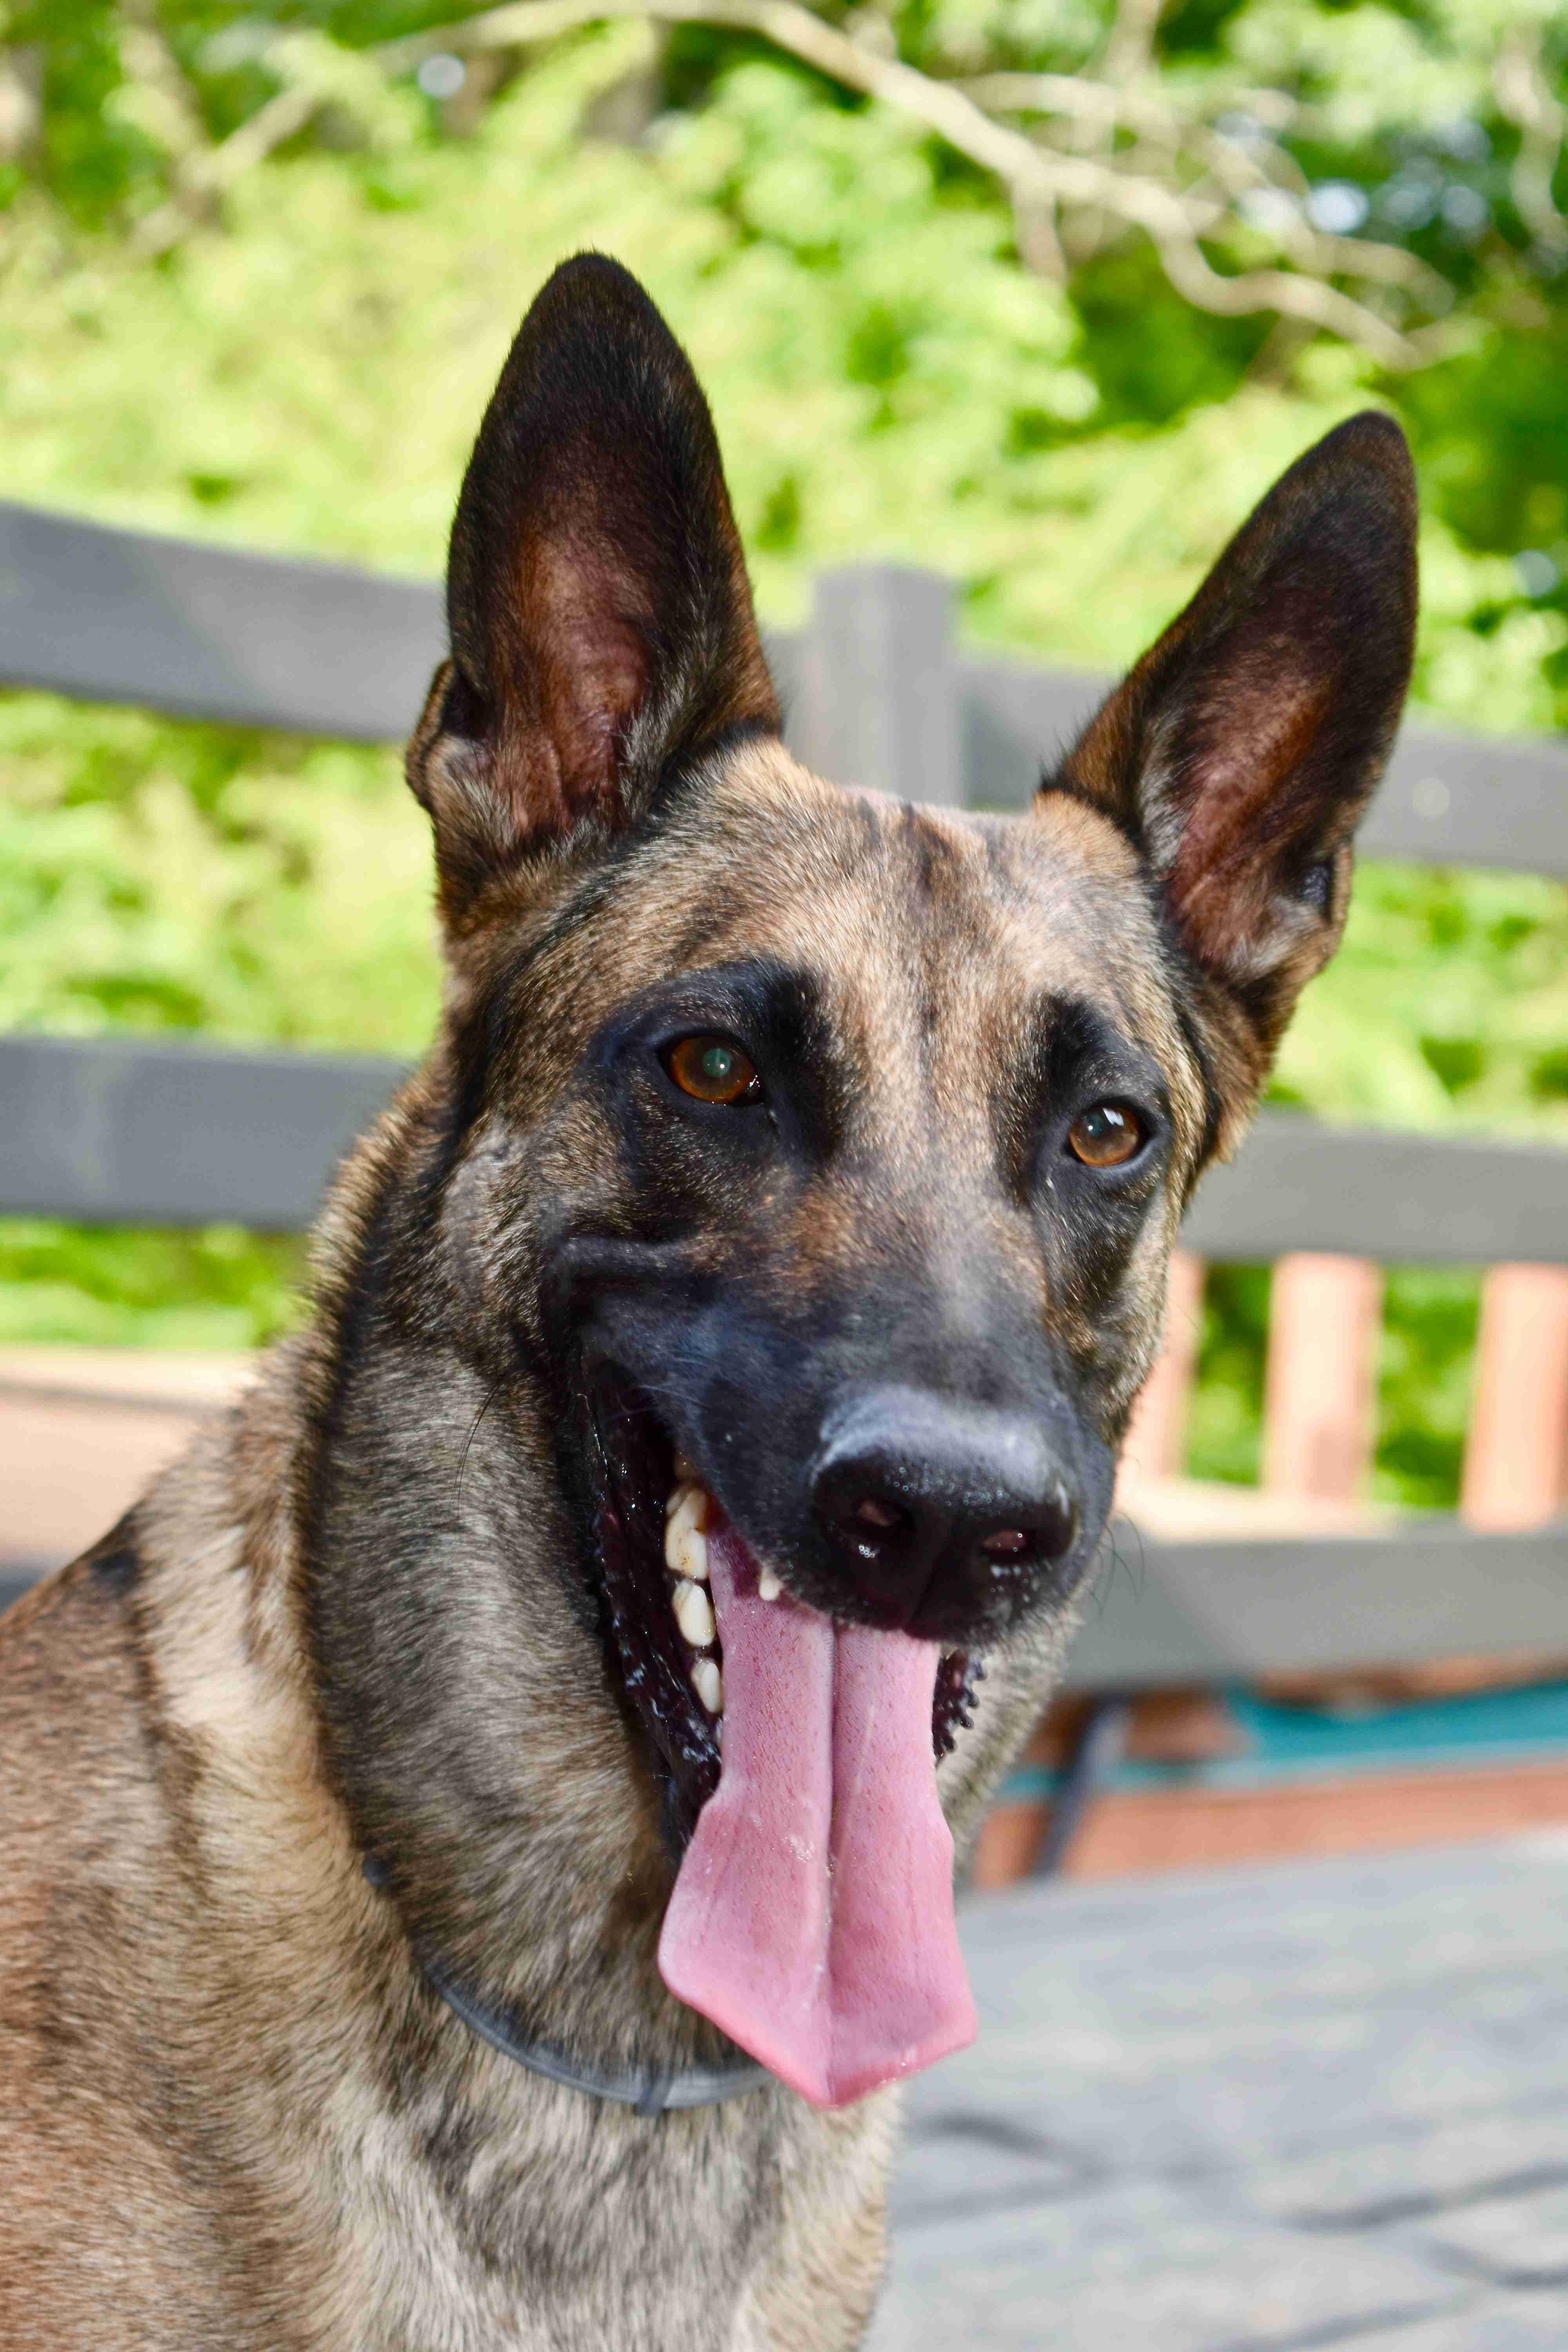 Can German shepherds be trained to become hearing dogs for the deaf?